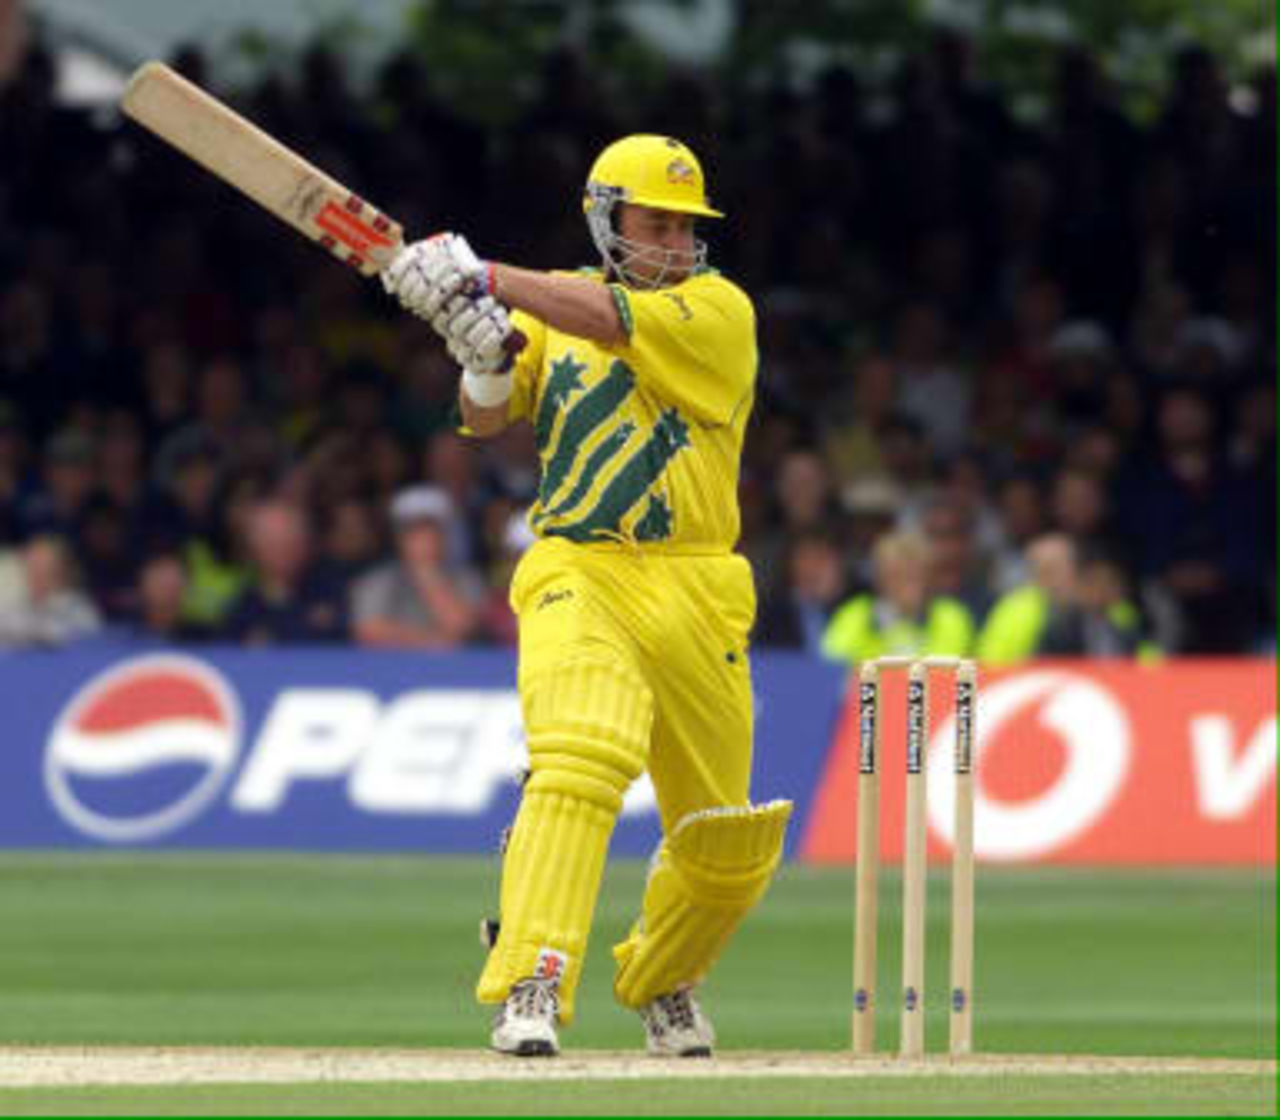 Australia's Darren Lehmann hits out during the Cricket World Cup final against Pakistan at Lords in London. Australia won by 8 wickets. 20 June 1999.